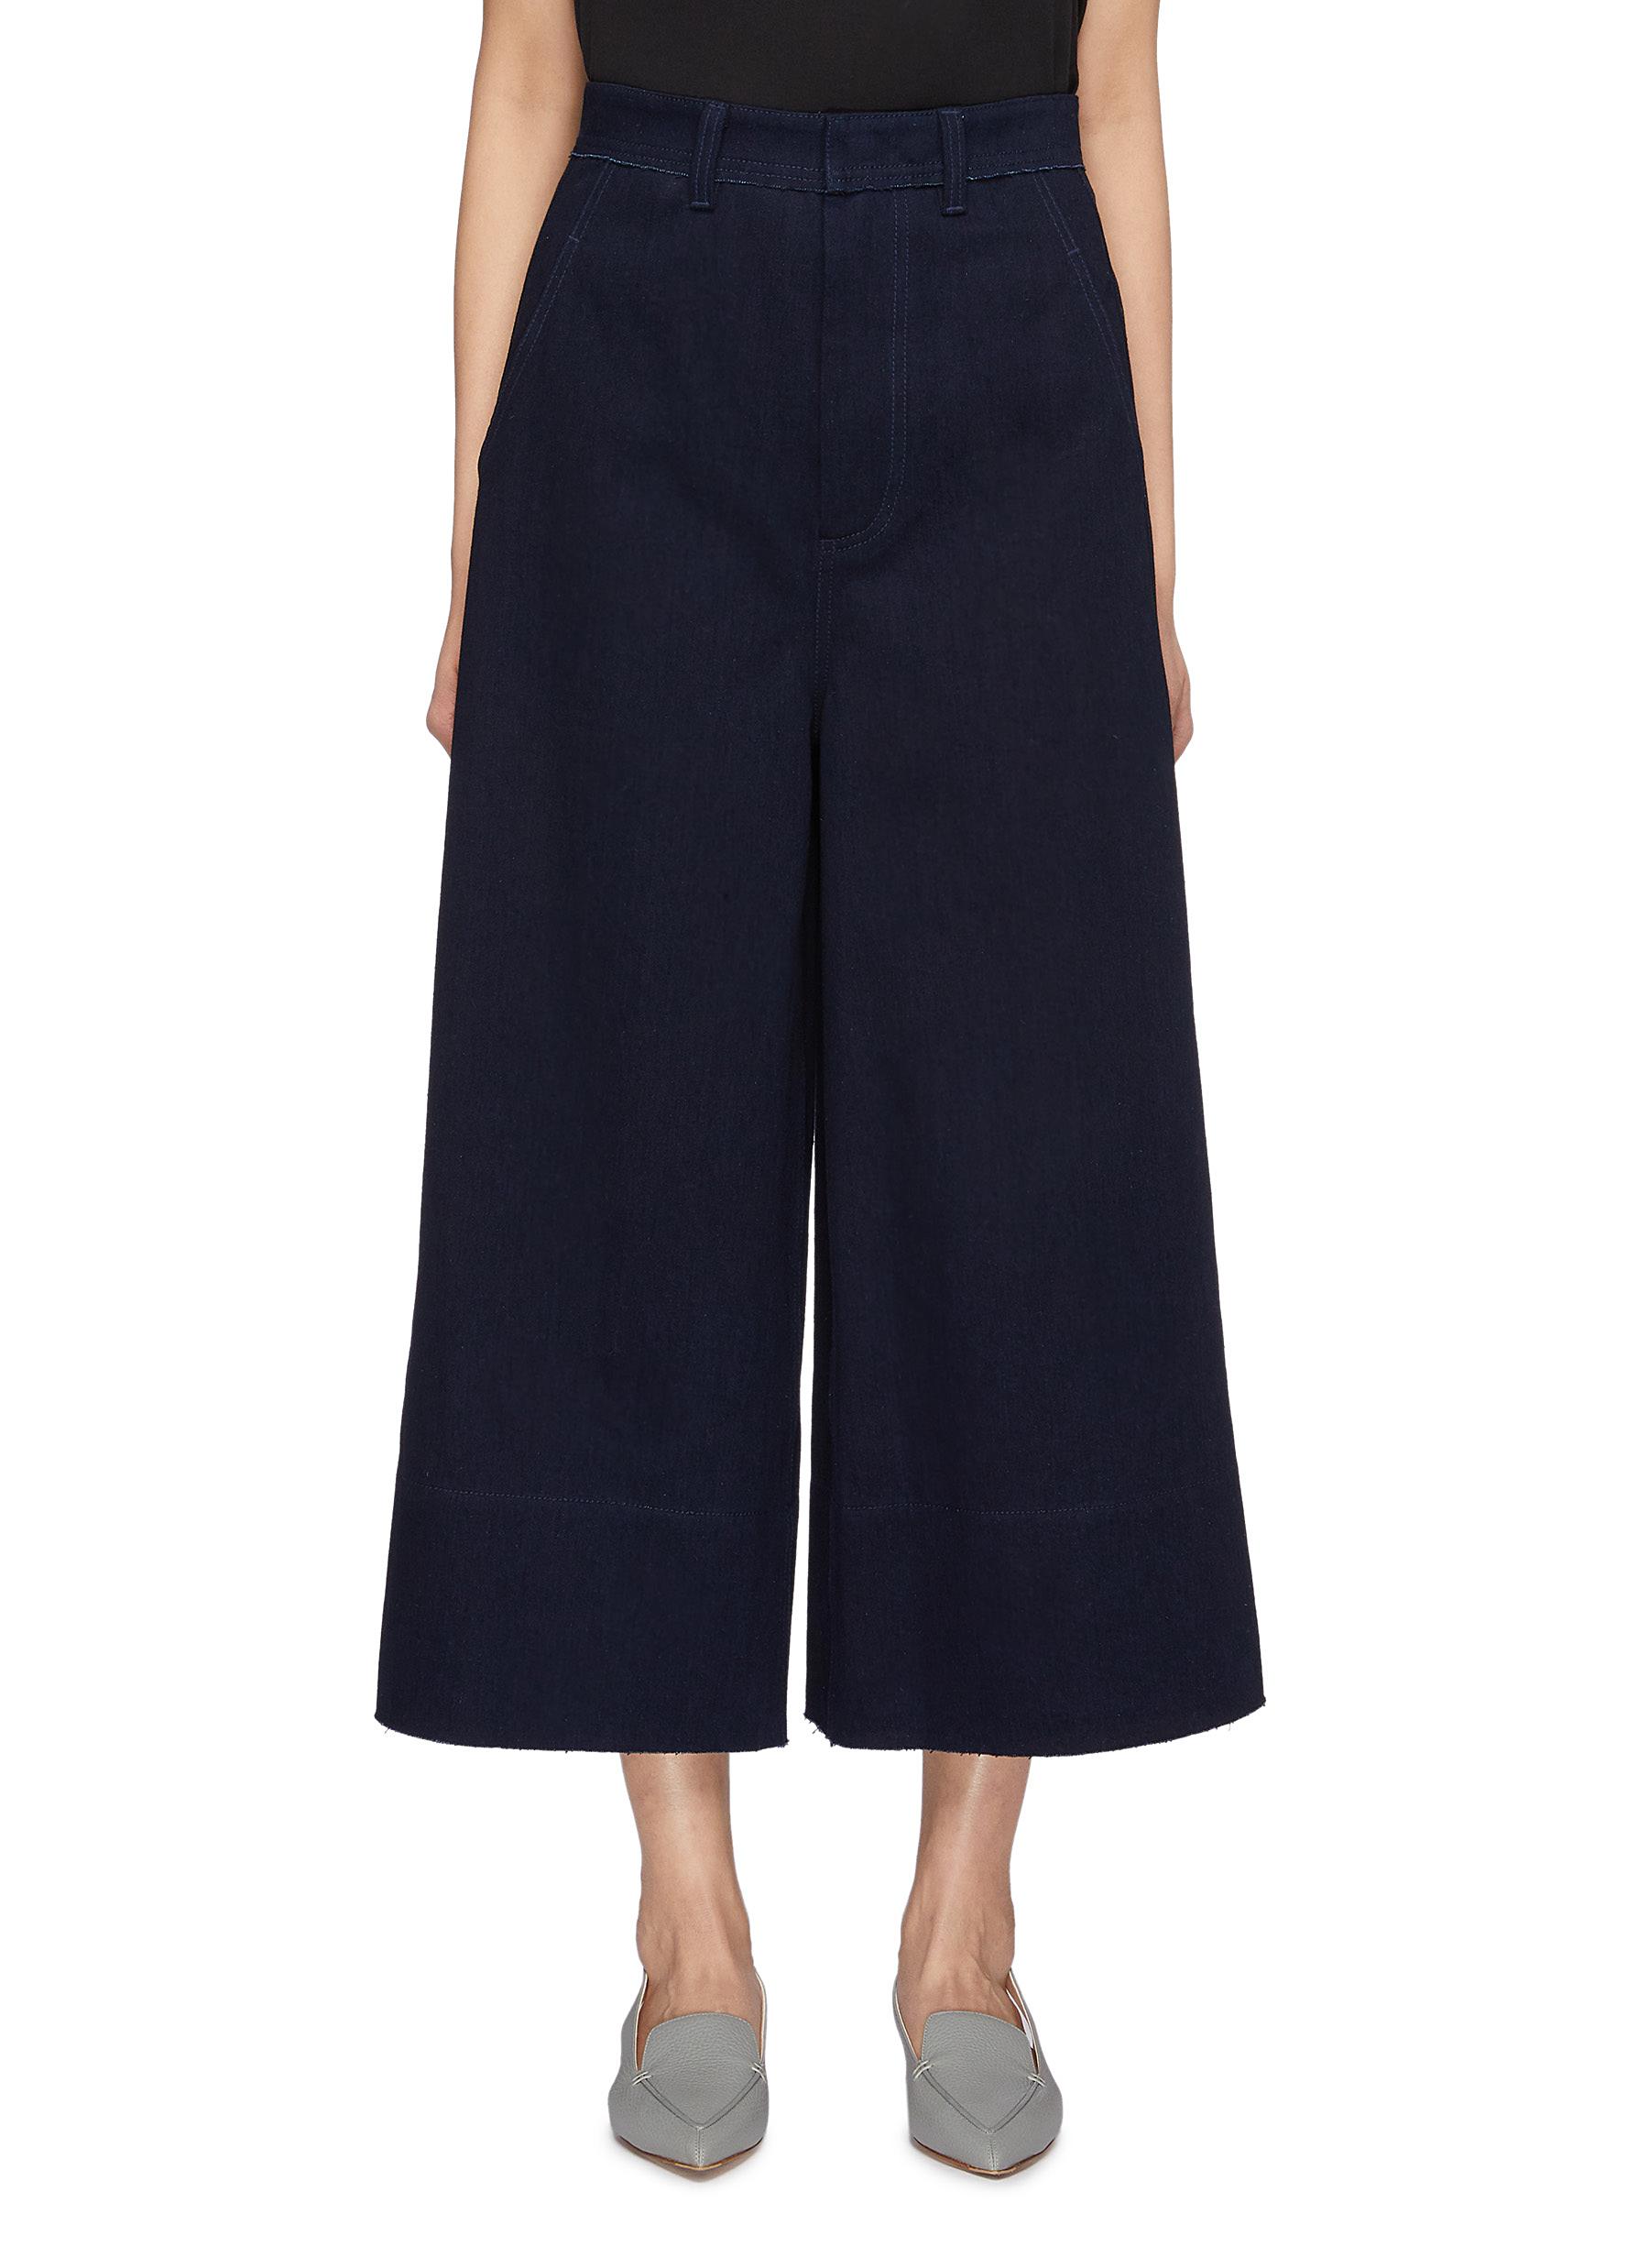 Washed denim culottes by Ms Min